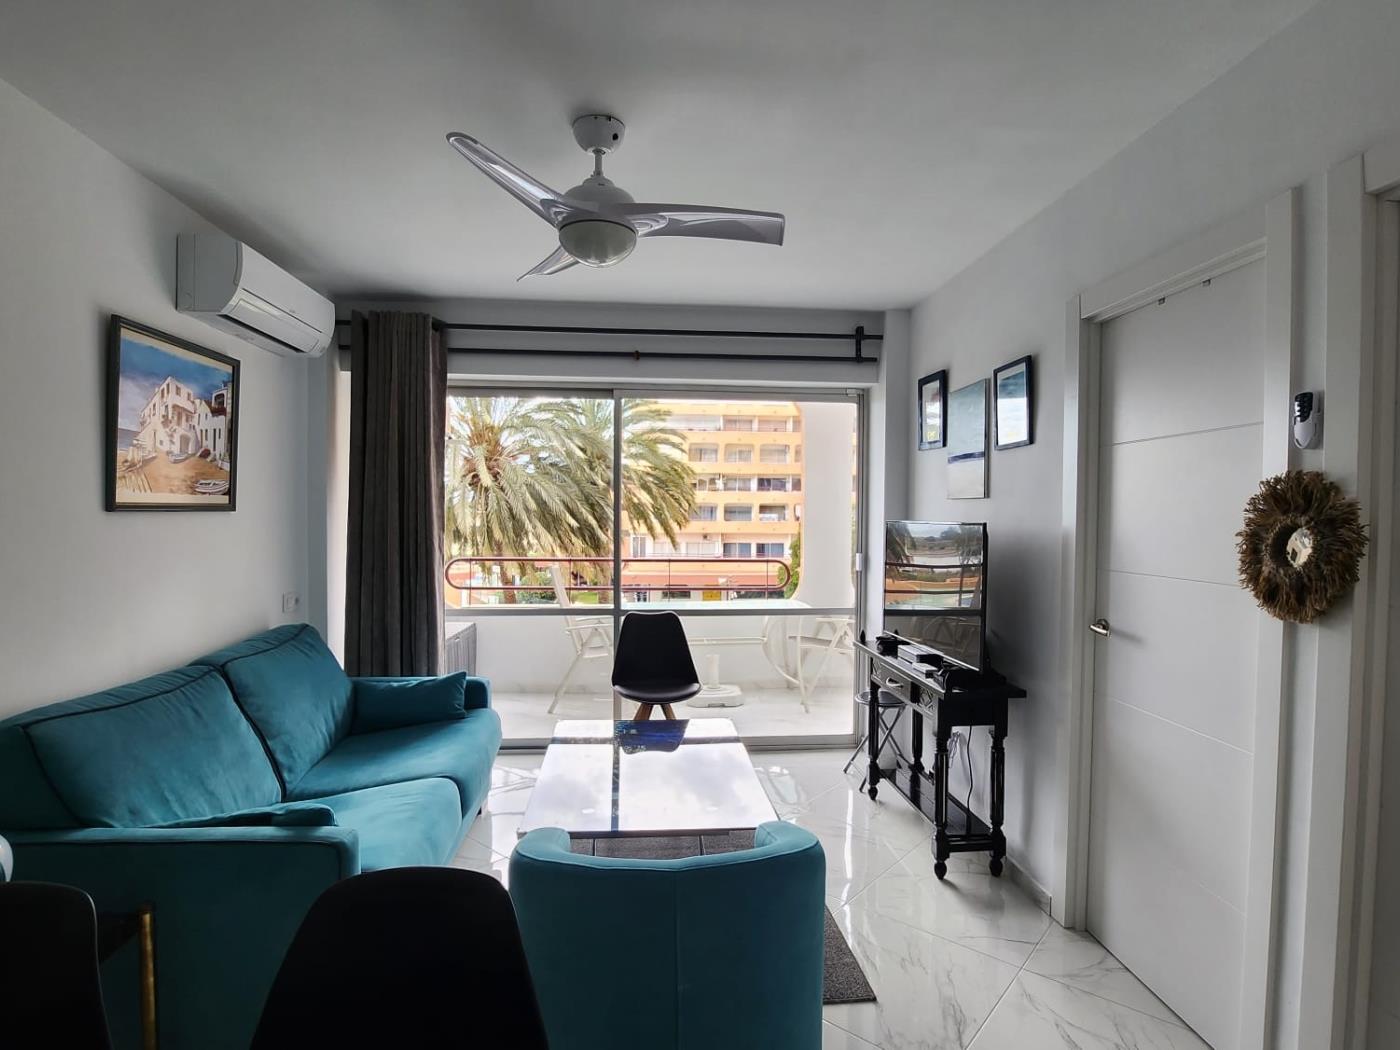 2 Bedroom apartment with sea view and canal 00117 in ROSES